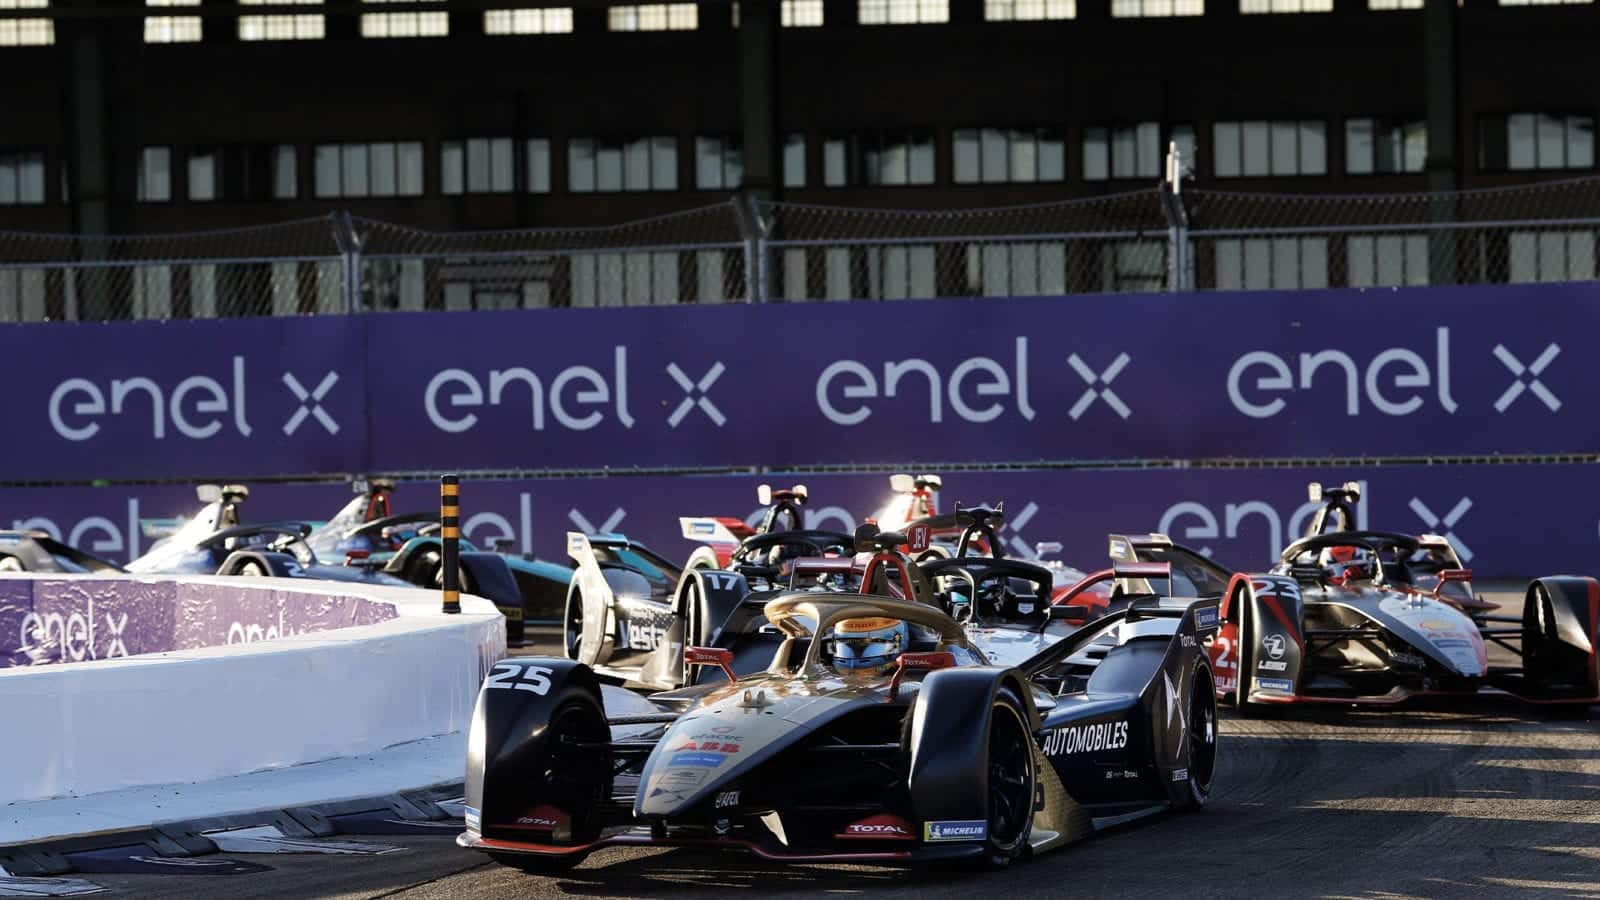 Jean Eric Vergne leads at Tempelhof Airport during one of the last races of the 2019-20 Formula E season in Berlin